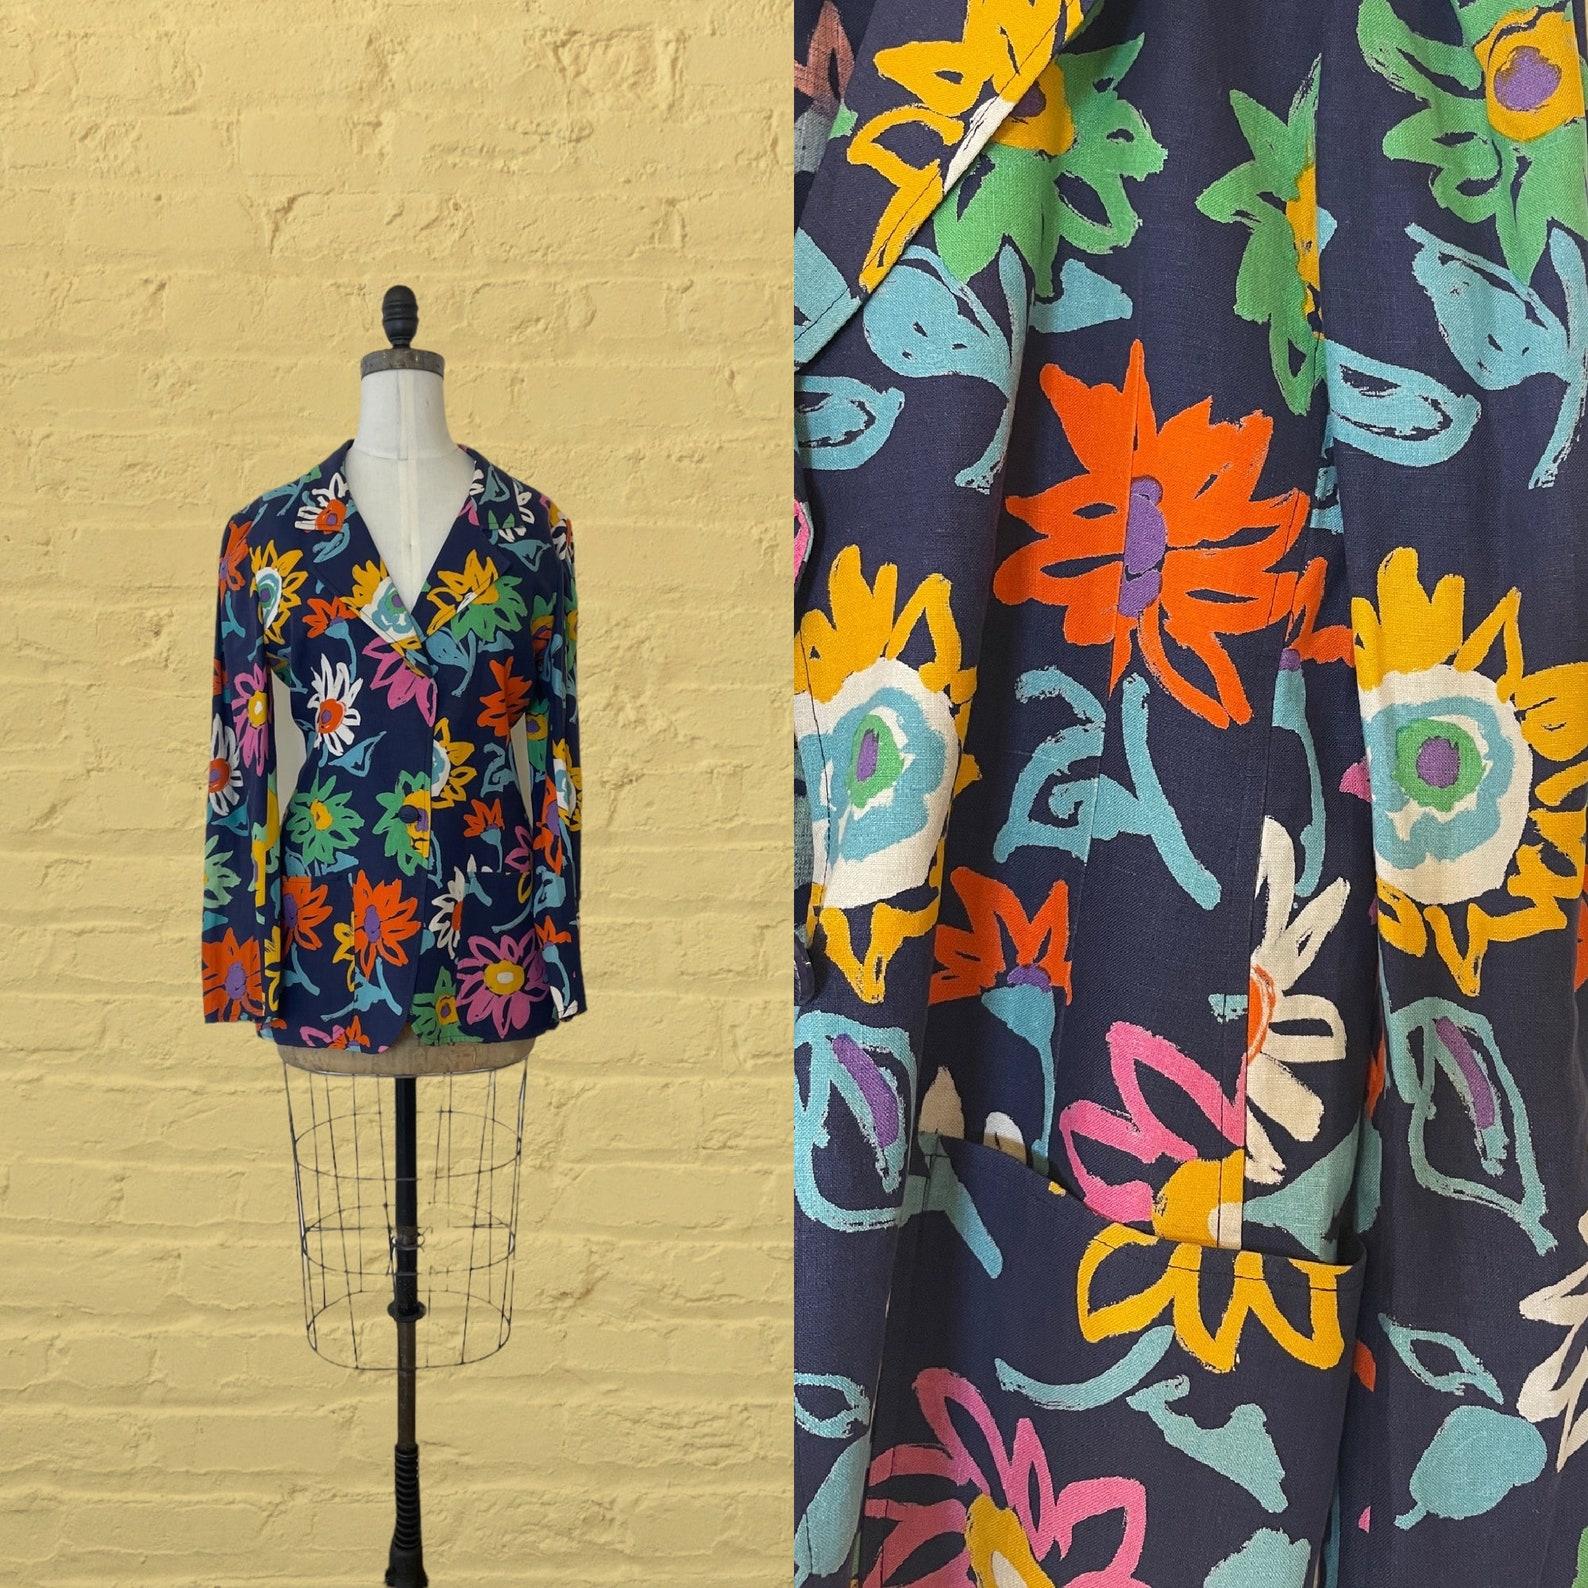 Vintage Ungaro blazer. navy blue with a colorful large scale flower print. notched lapel. patch pockets. single button closure. jacket is unlined.

✩ This is an amazing piece of fashion history by notable French designer Emanuel Ungaro!

Circa